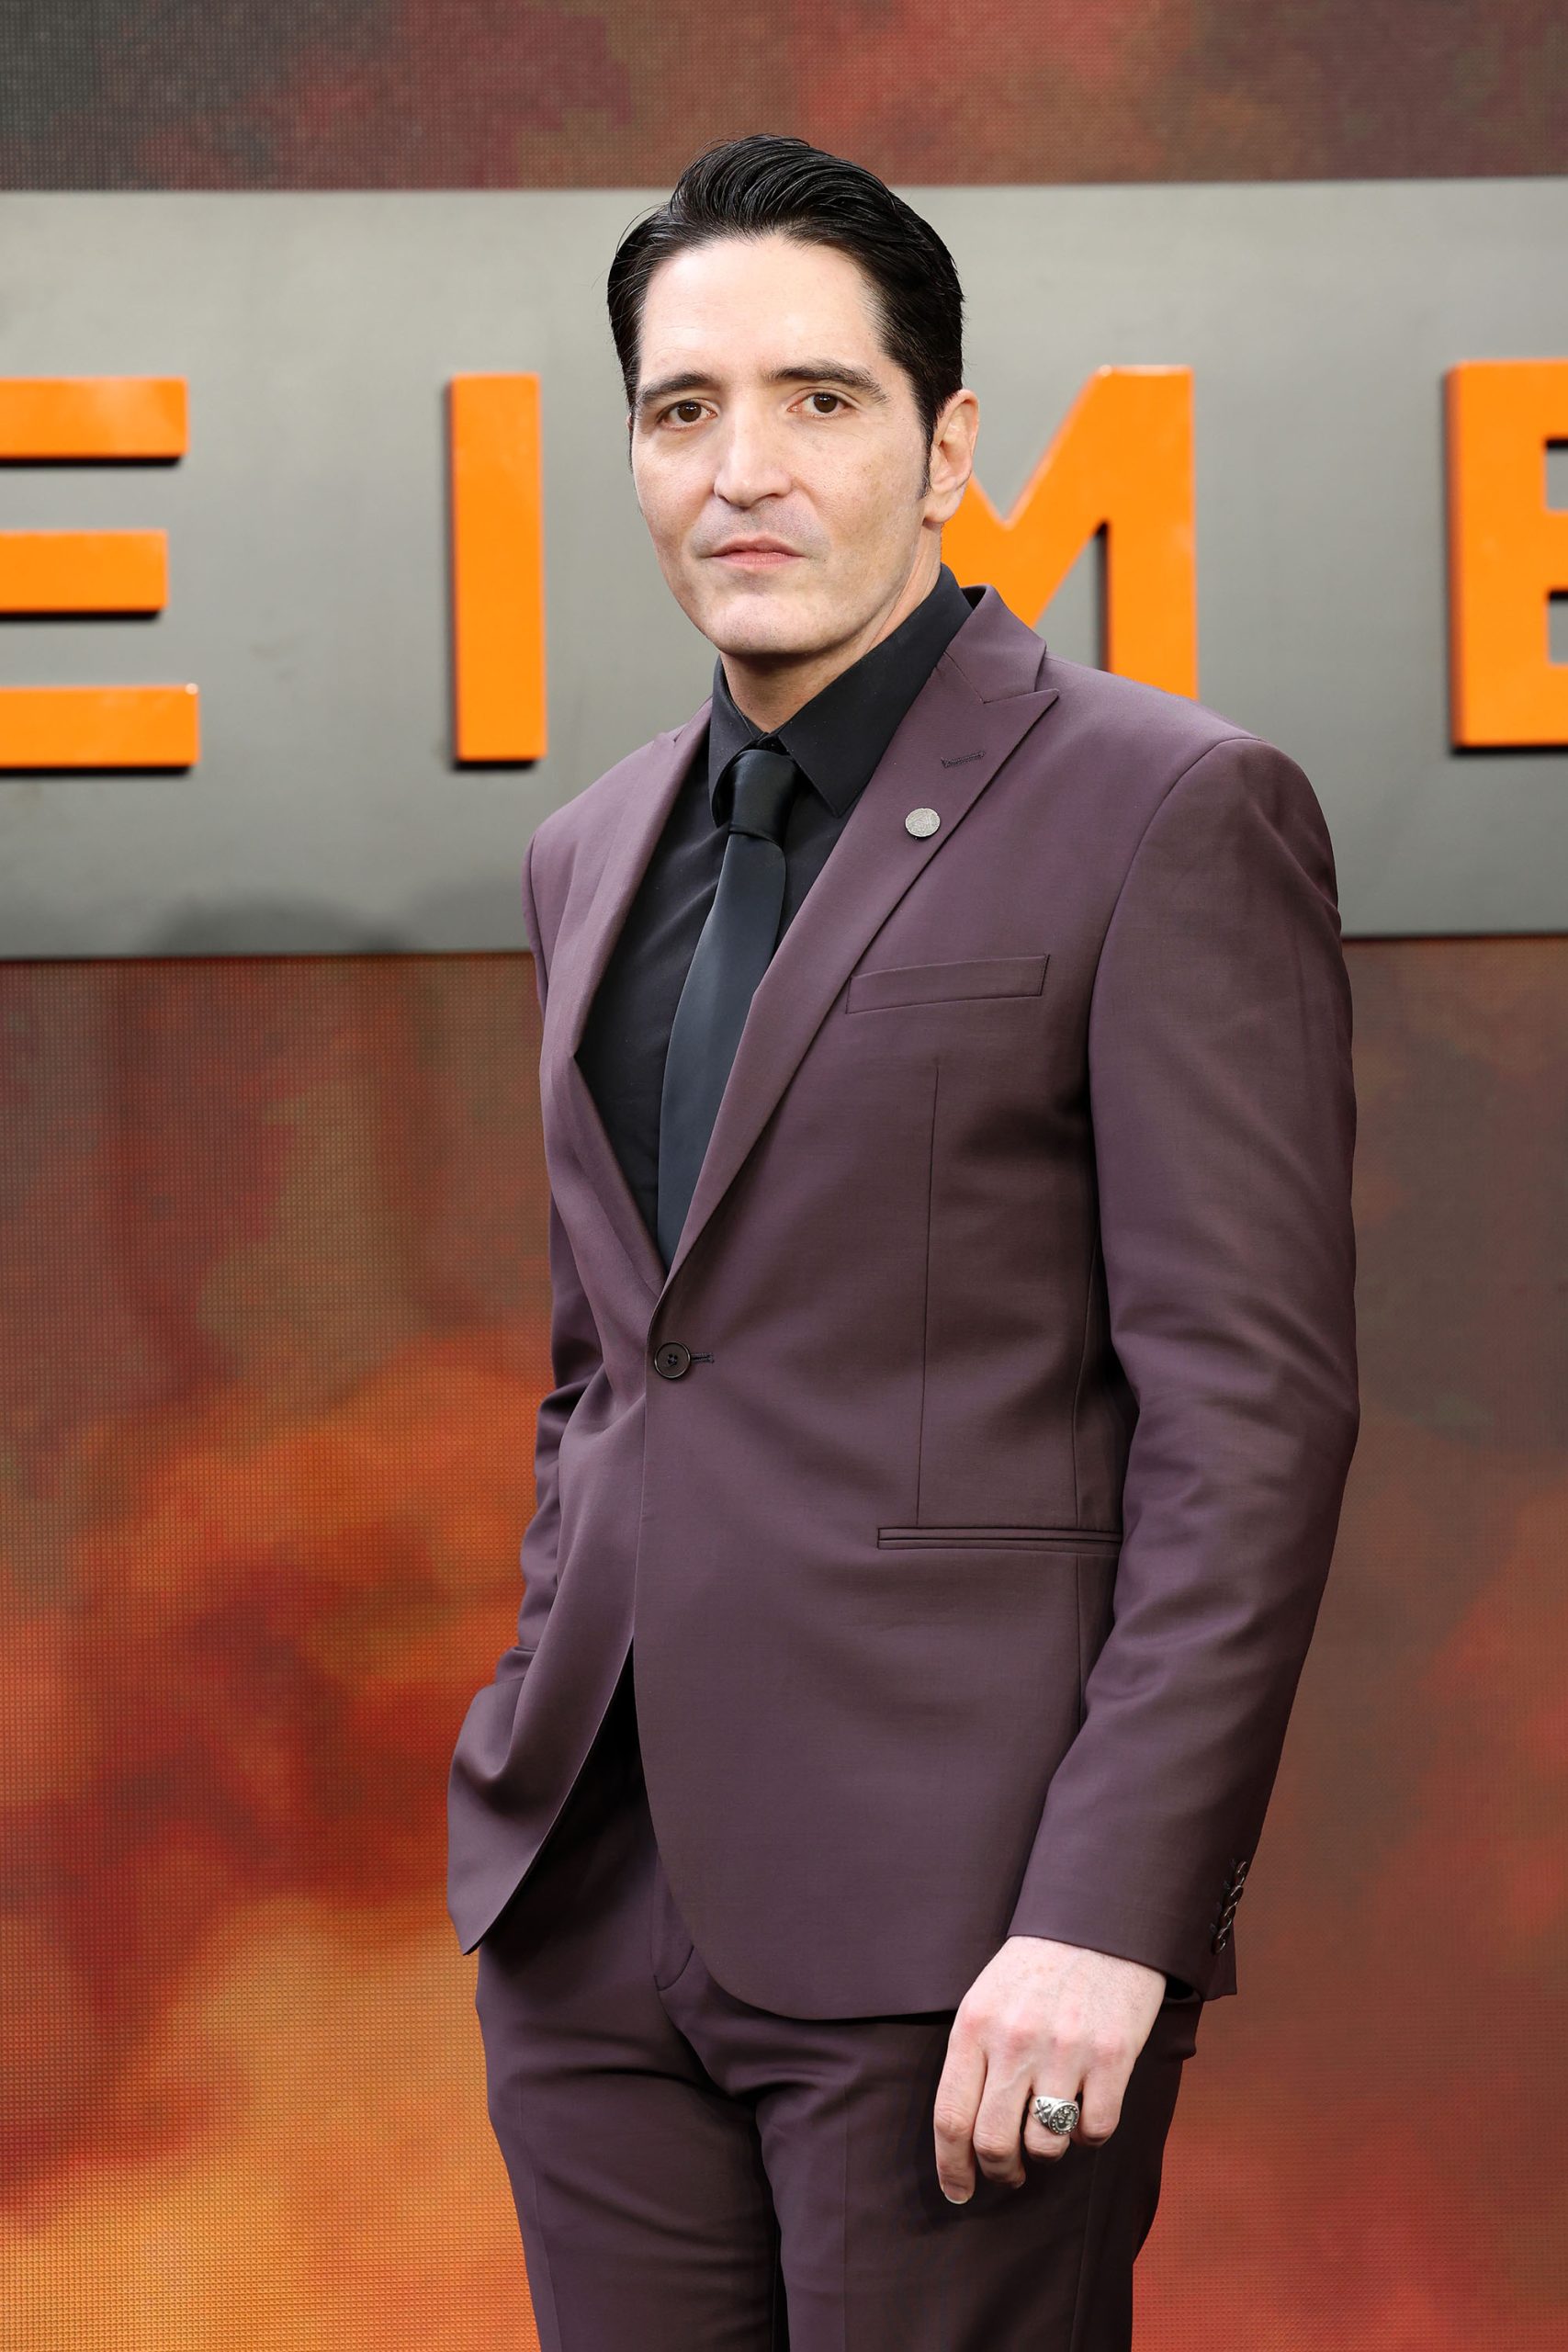 LONDON, ENGLAND - JULY 13: David Dastmalchian attends the UK Premiere of "Oppenheimer" at Odeon Luxe Leicester Square on July 13, 2023 in London, England. (Photo by Lia Toby/Getty Images for Universal Pictures)